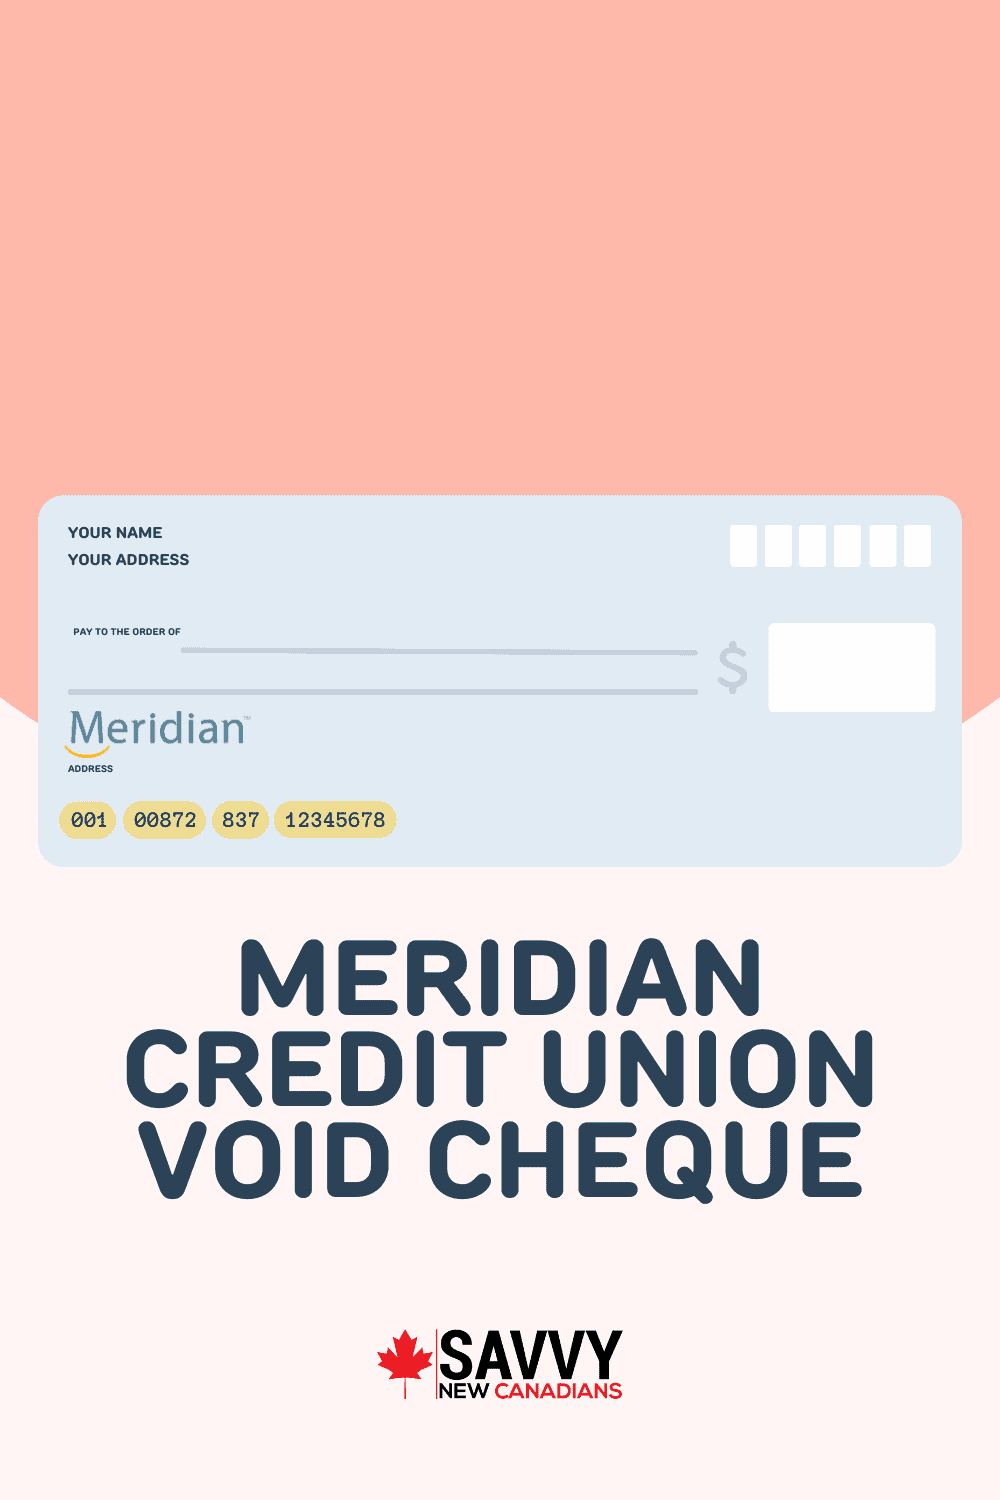 Meridian Credit Union Void Cheque: Setup Direct Deposits and Pre-authorized Payments